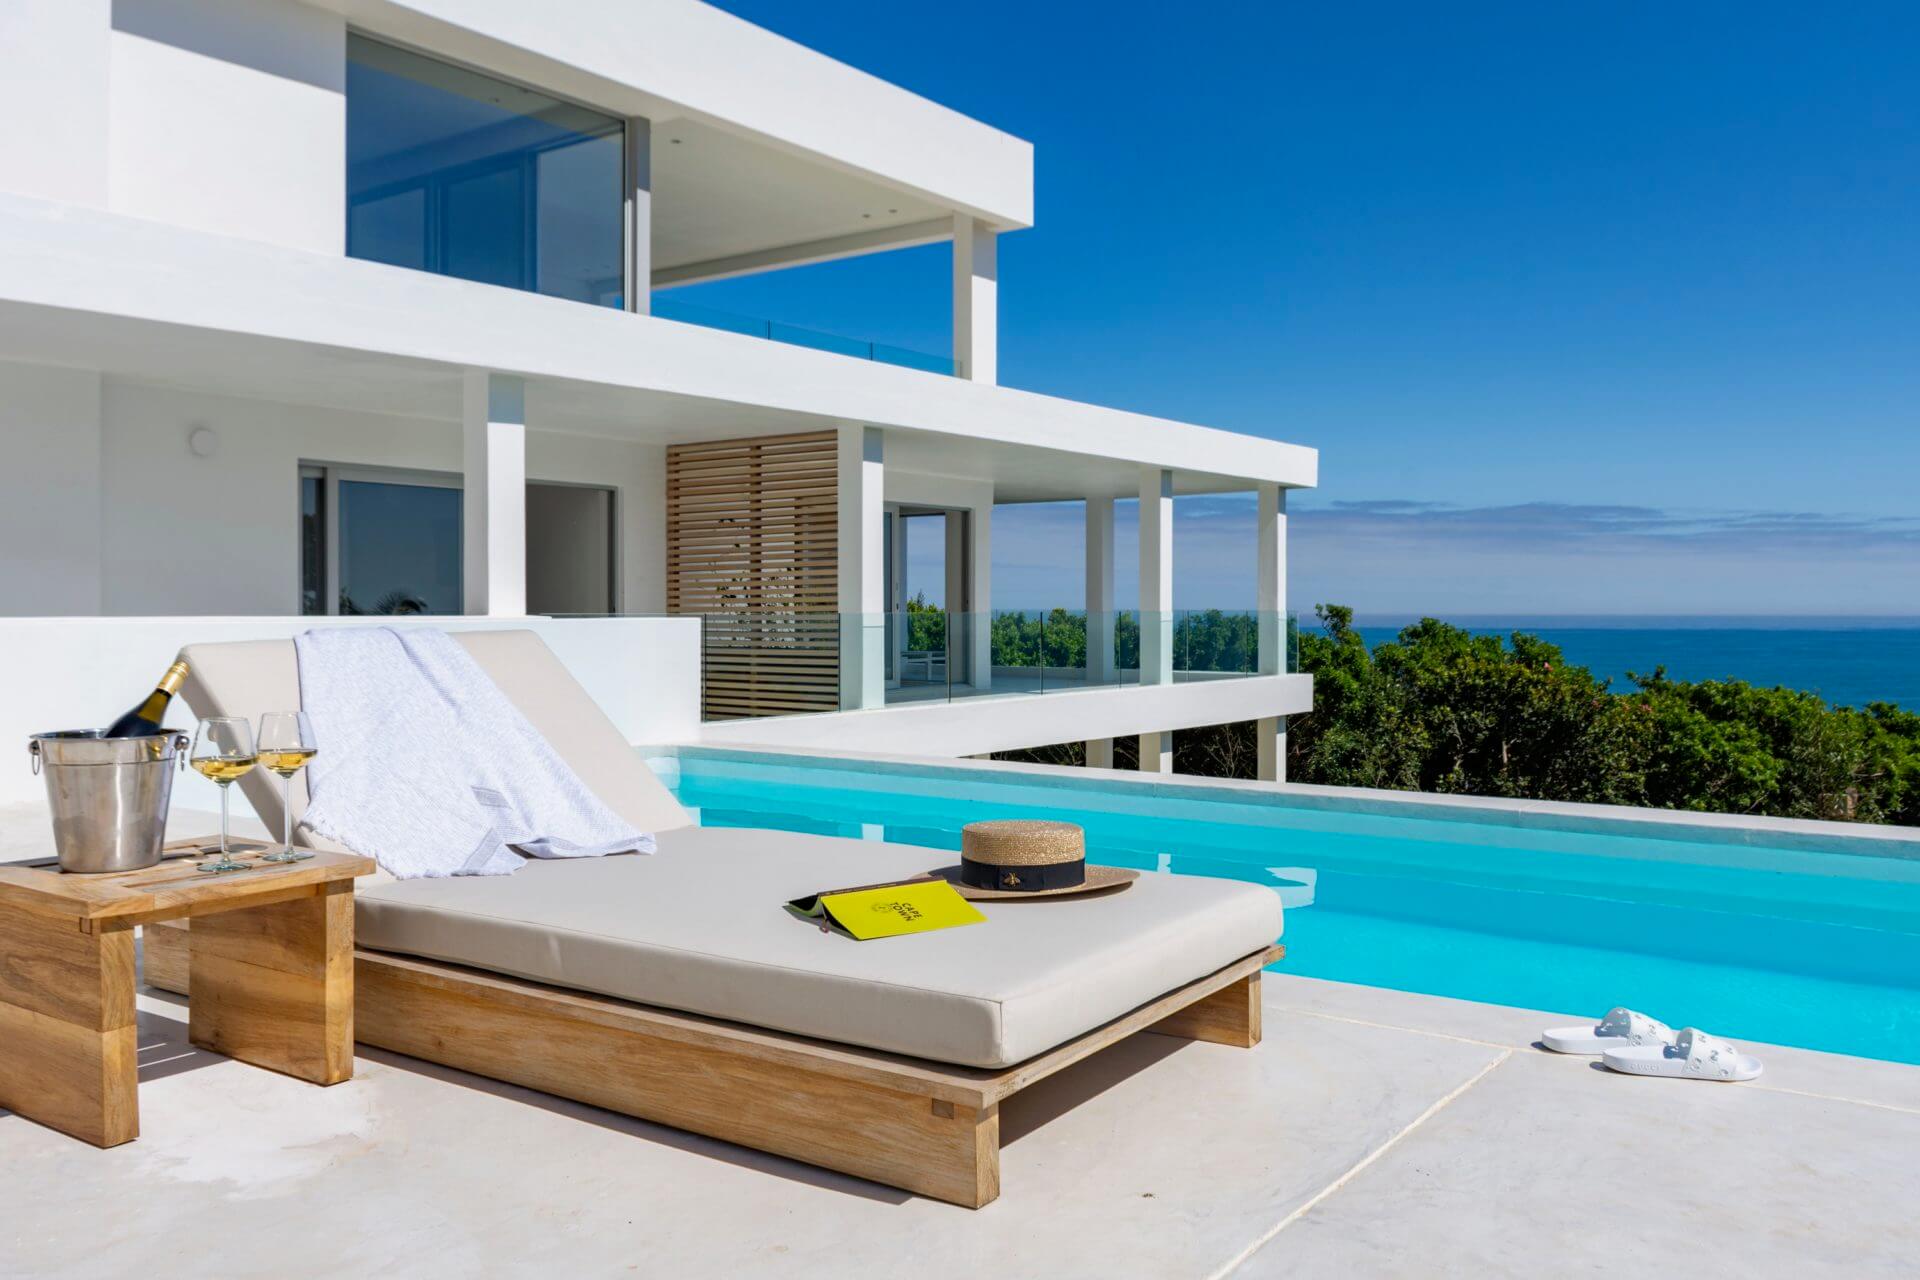 Photo 16 of Villa Ibiza accommodation in Camps Bay, Cape Town with 8 bedrooms and 8 bathrooms